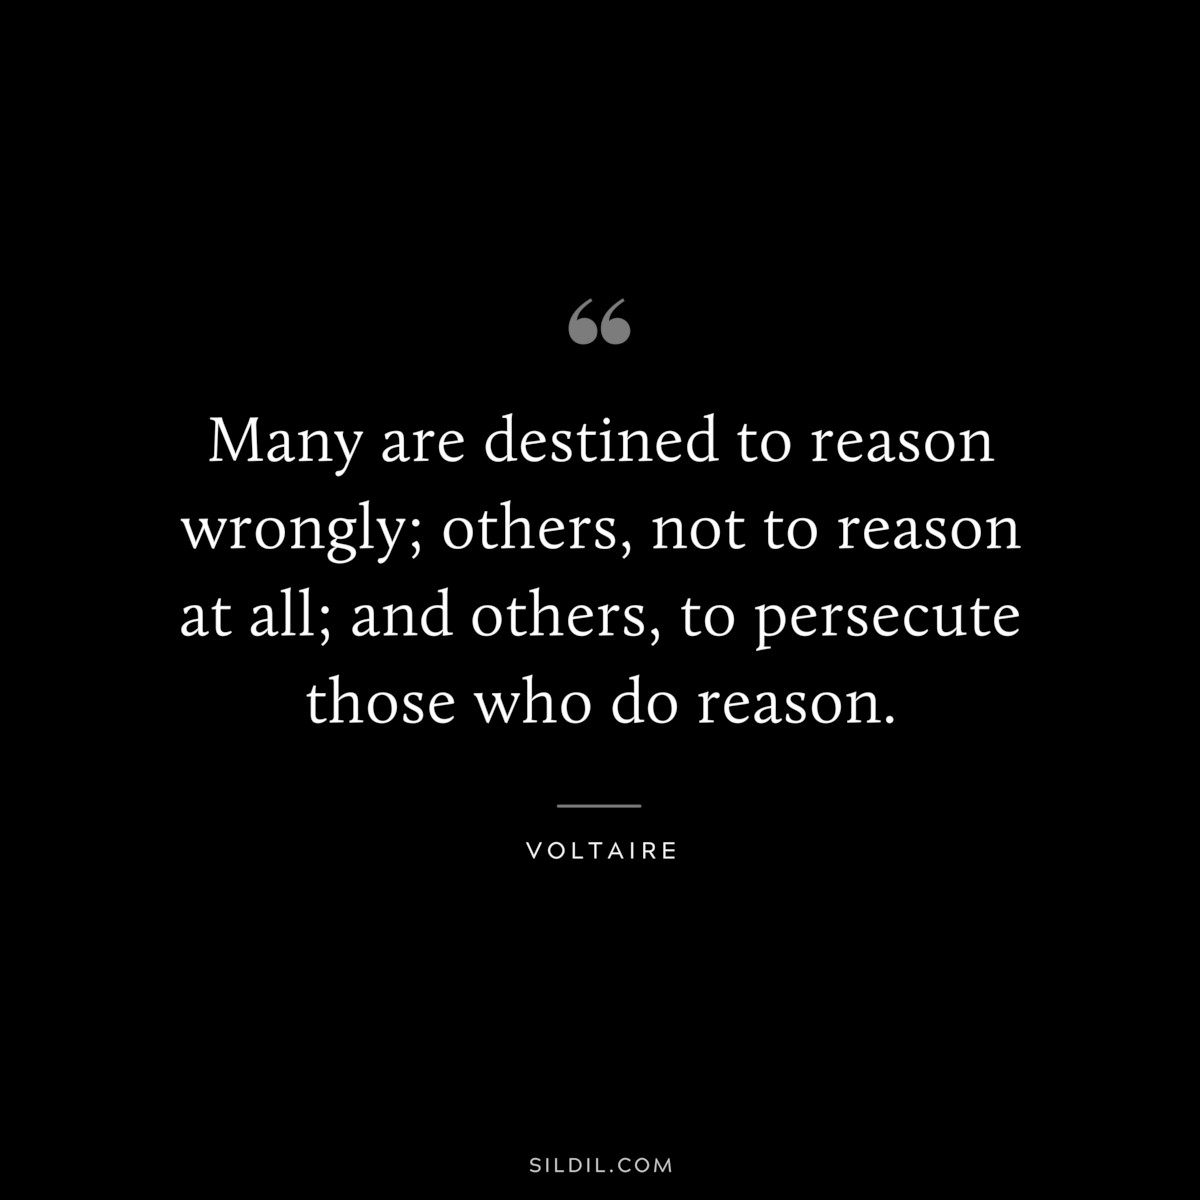 Many are destined to reason wrongly; others, not to reason at all; and others, to persecute those who do reason. ― Voltaire